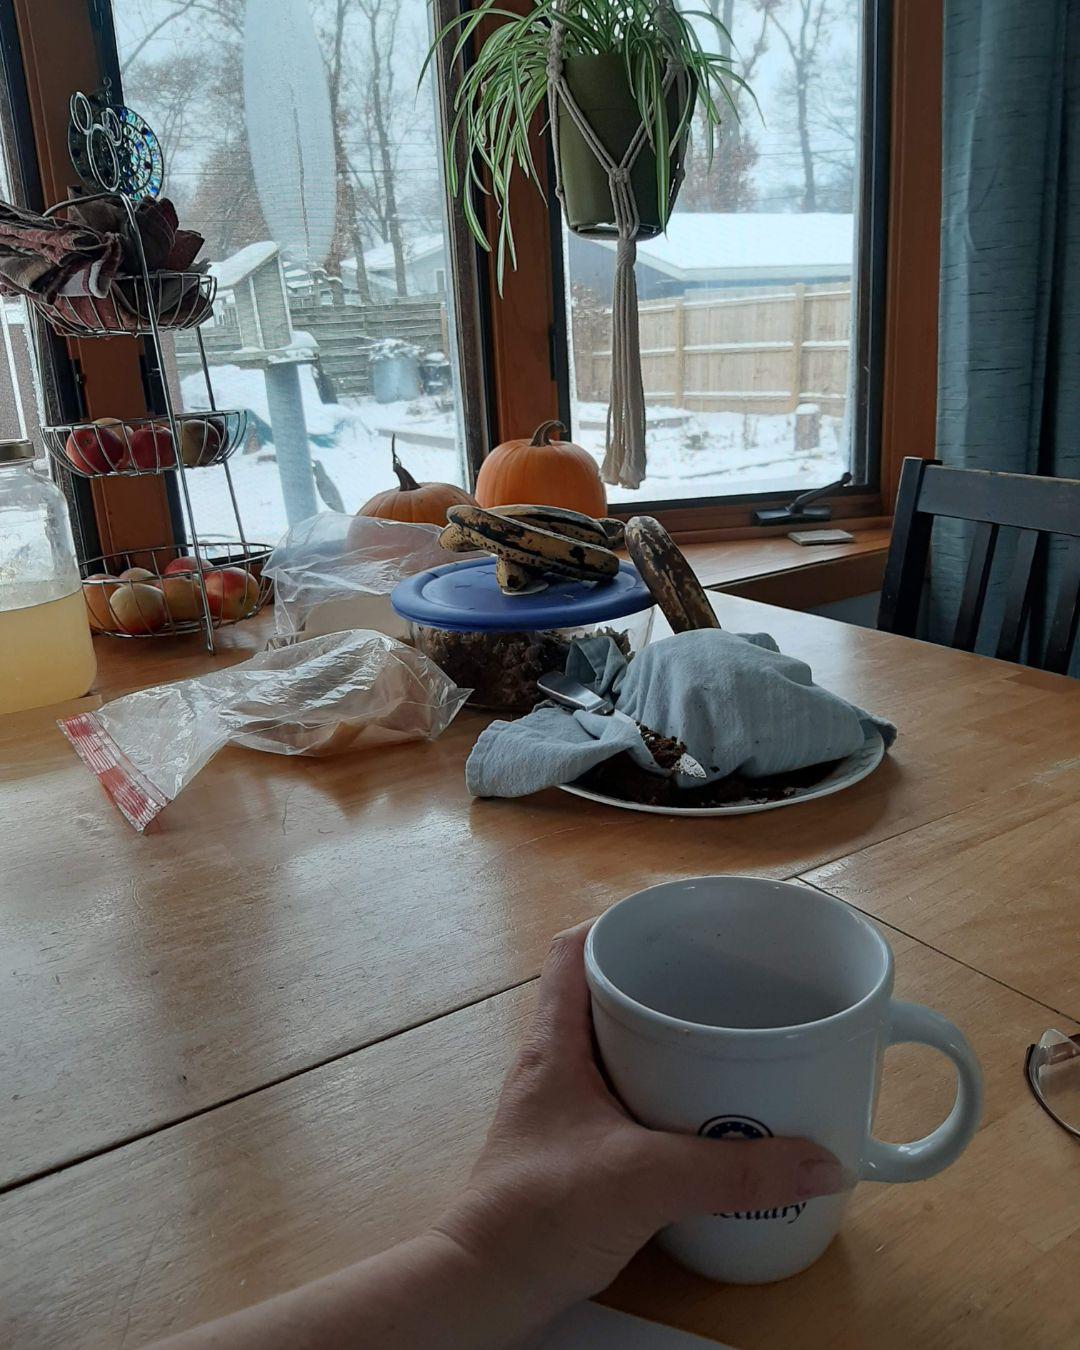 a table with a hand holding a mug in the foreground, further on the table is pumpkins, apples, bananas. Window shows a winter outdoor seen. 